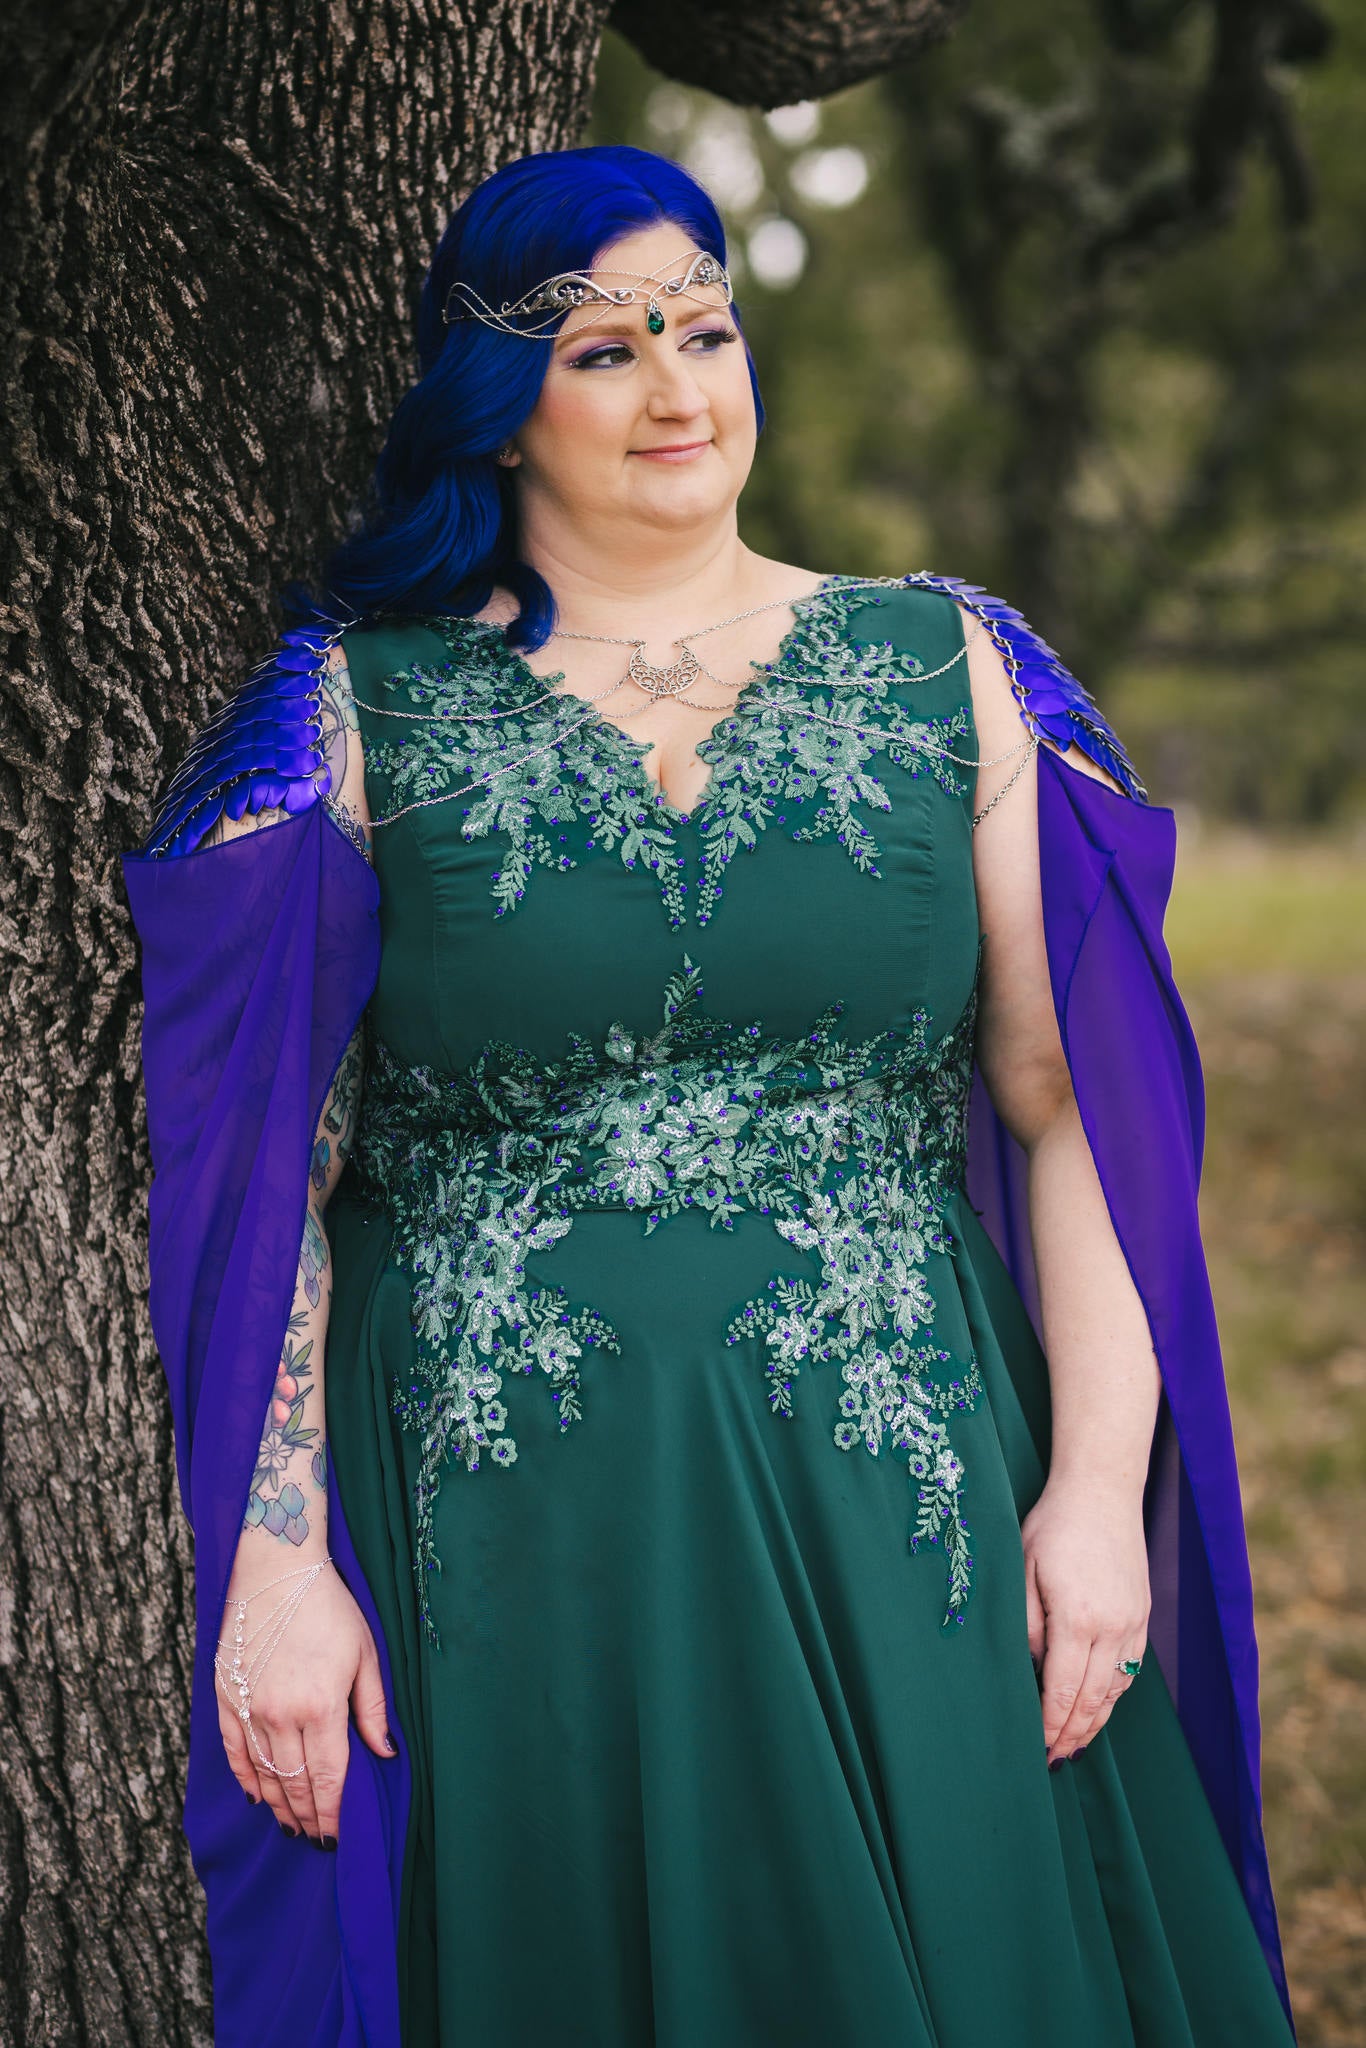 Green Chiffon Wedding Dress with Floral Lace Appliques and Purple Rhinestones